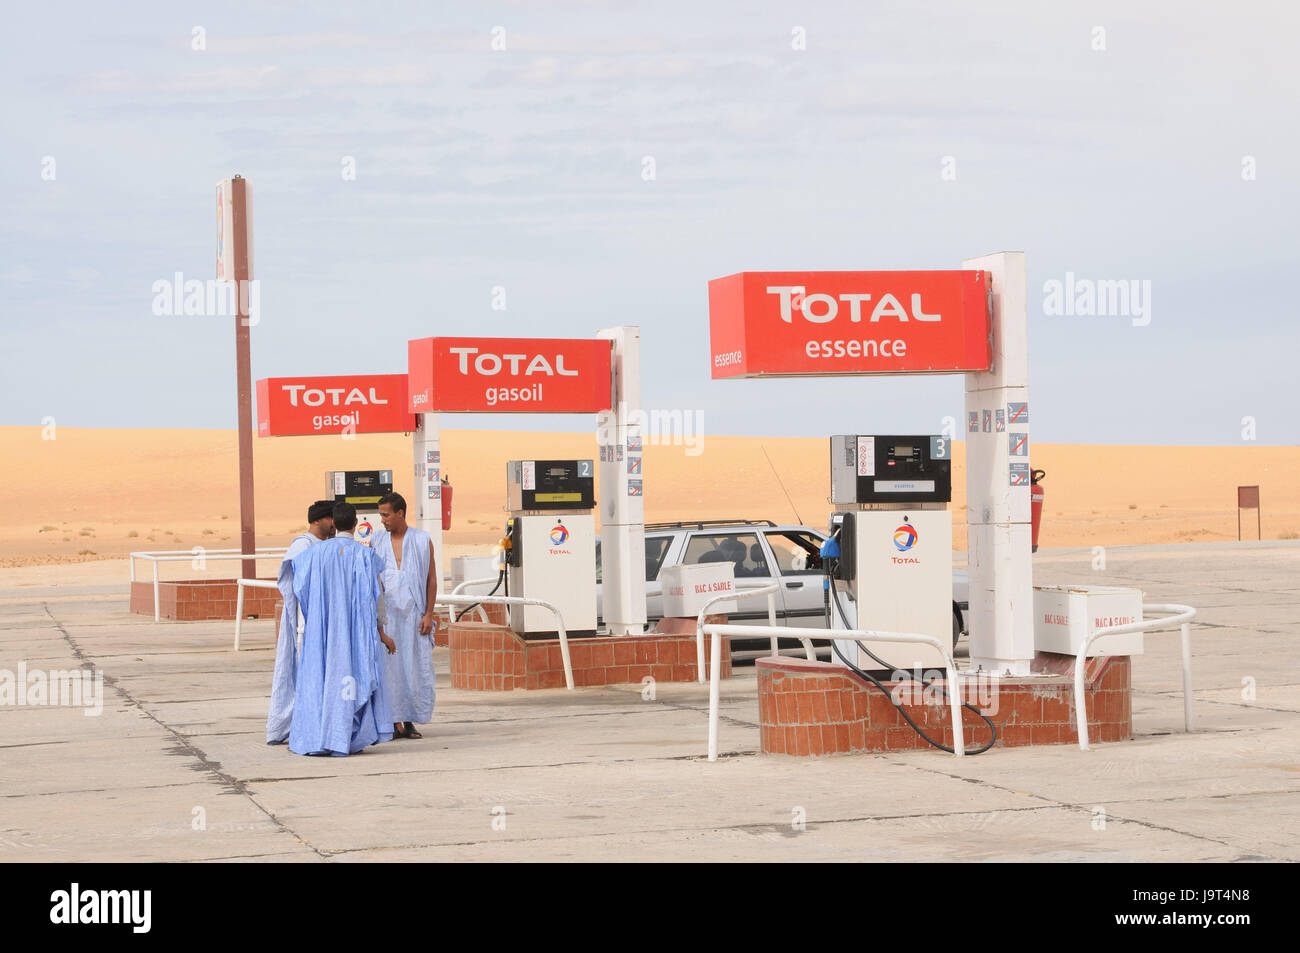 Mauritania,desert,Sahara,filling station,petrol pumps,men,fuel,no model with release,with person,locals,bedouins,progress,vehicle,car,outside,three, Stock Photo